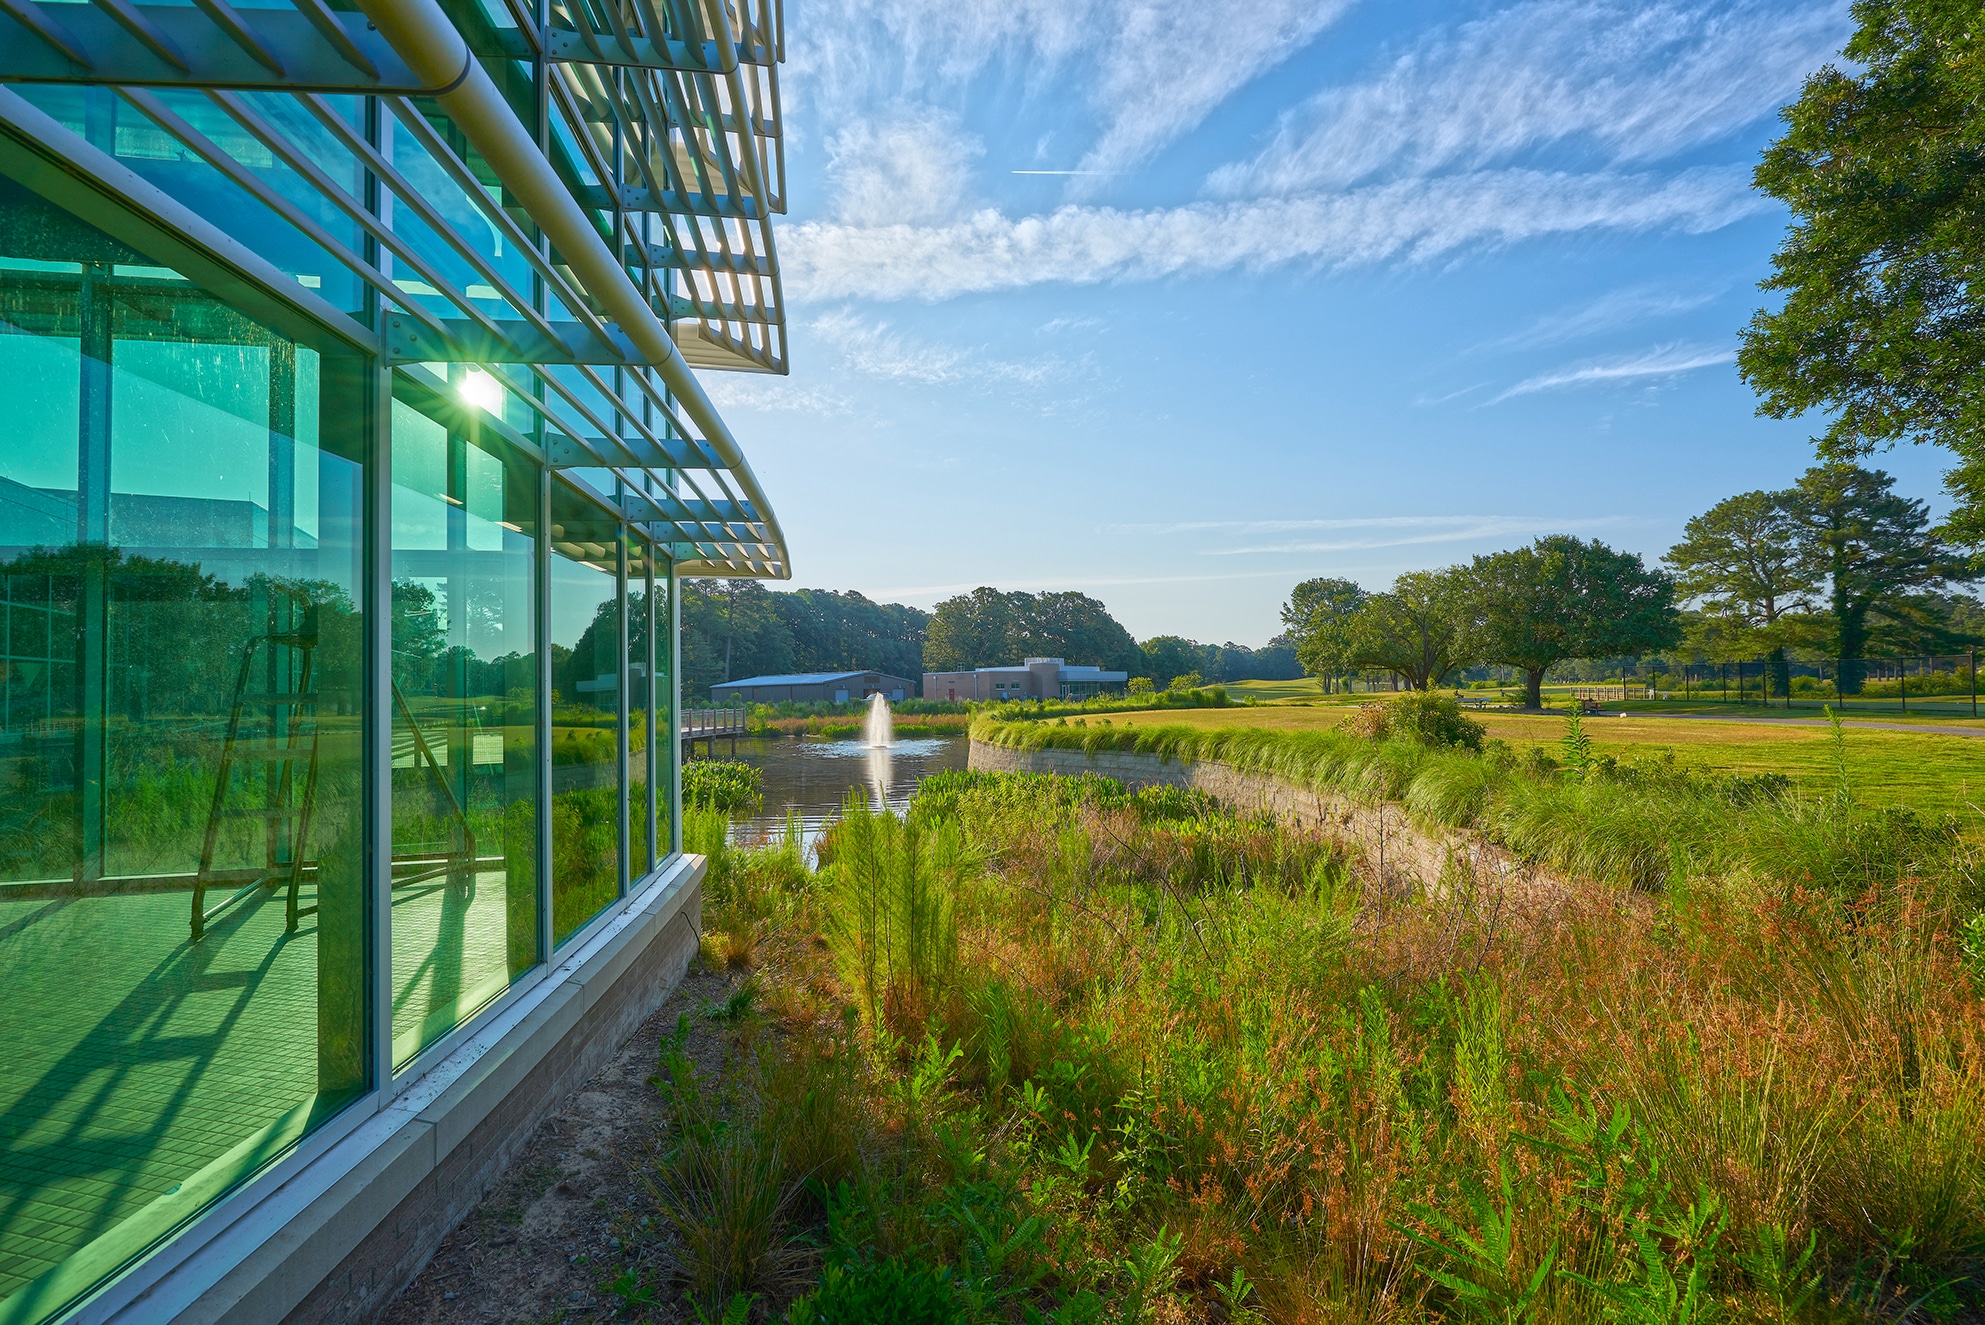 Kimley-Horn provided engineering, surface water, and stormwater management services for the new Bow Creek Recreation Center in Virginia Beach, VA